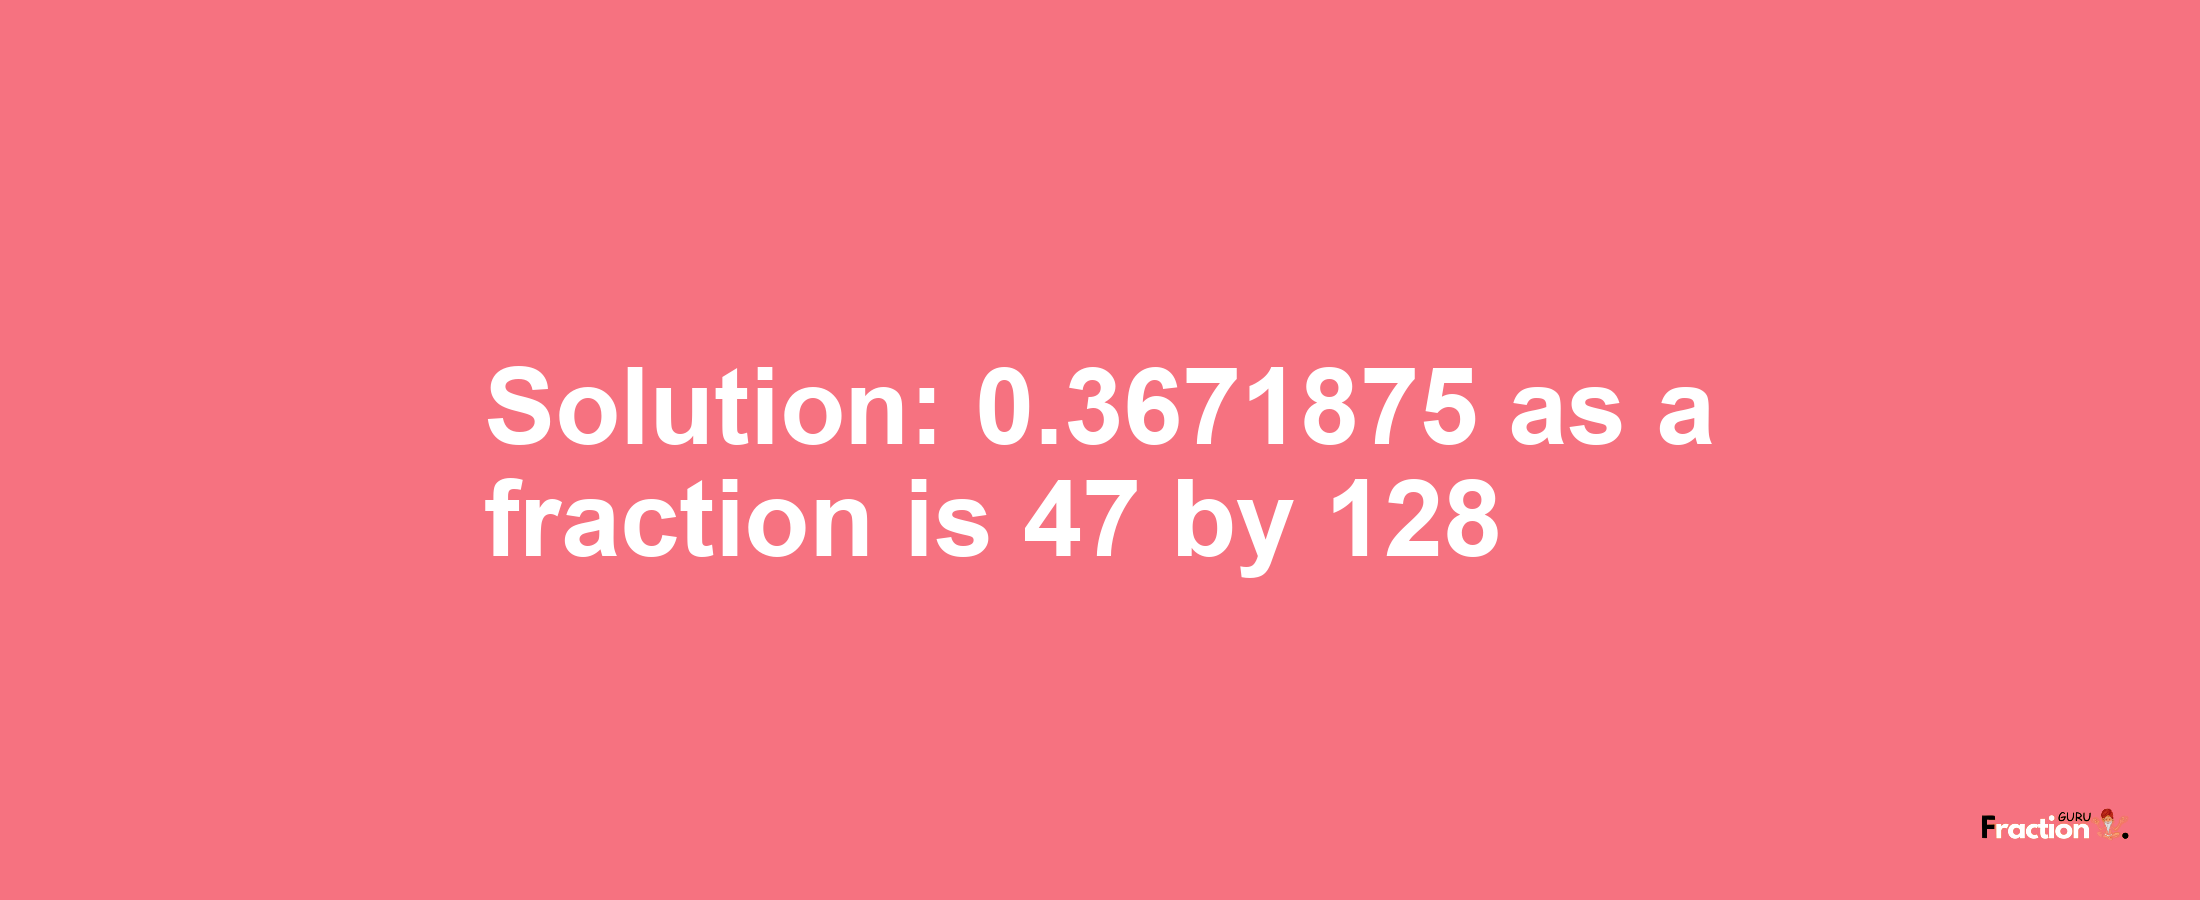 Solution:0.3671875 as a fraction is 47/128